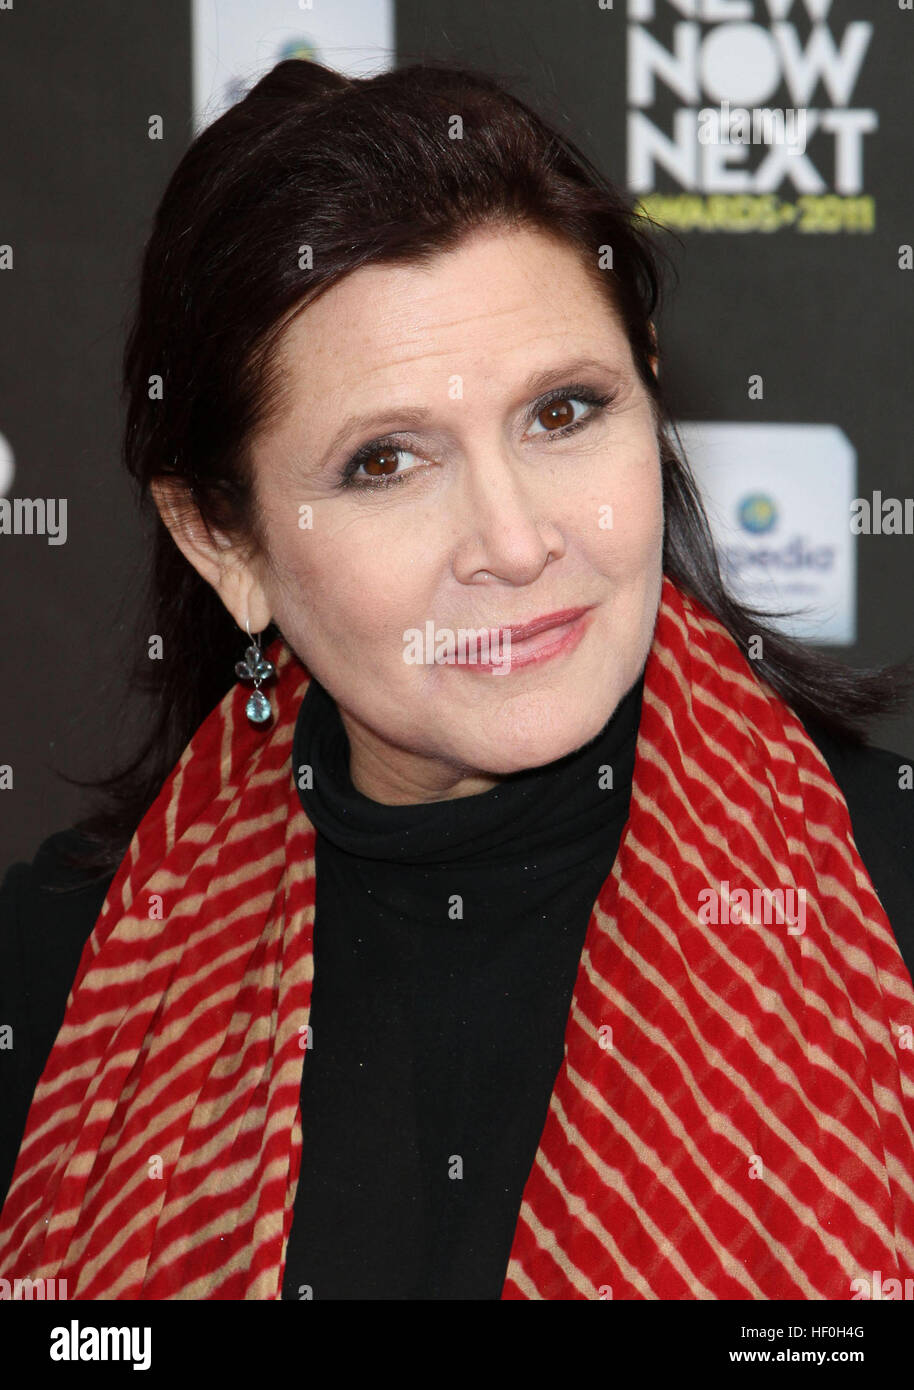 FILE PIC: Hollywood, CA, USA. 7th Apr, 2011. 27 December 2016 - Carrie Fisher, the iconic actress who portrayed Princess Leia in the Star Wars series, died Tuesday following a massive heart attack. Carrie Frances Fisher an American actress, screenwriter, author, producer, and speaker, was the daughter of singer Eddie Fisher and actress Debbie Reynolds. File Photo: 7 April 2011 - Hollywood, California - Carrie Fisher. Logo's ''NewNowNext Awards'' 2011 Held At Avalon. Credit: ZUMA Press, Inc./Alamy Live News Stock Photo